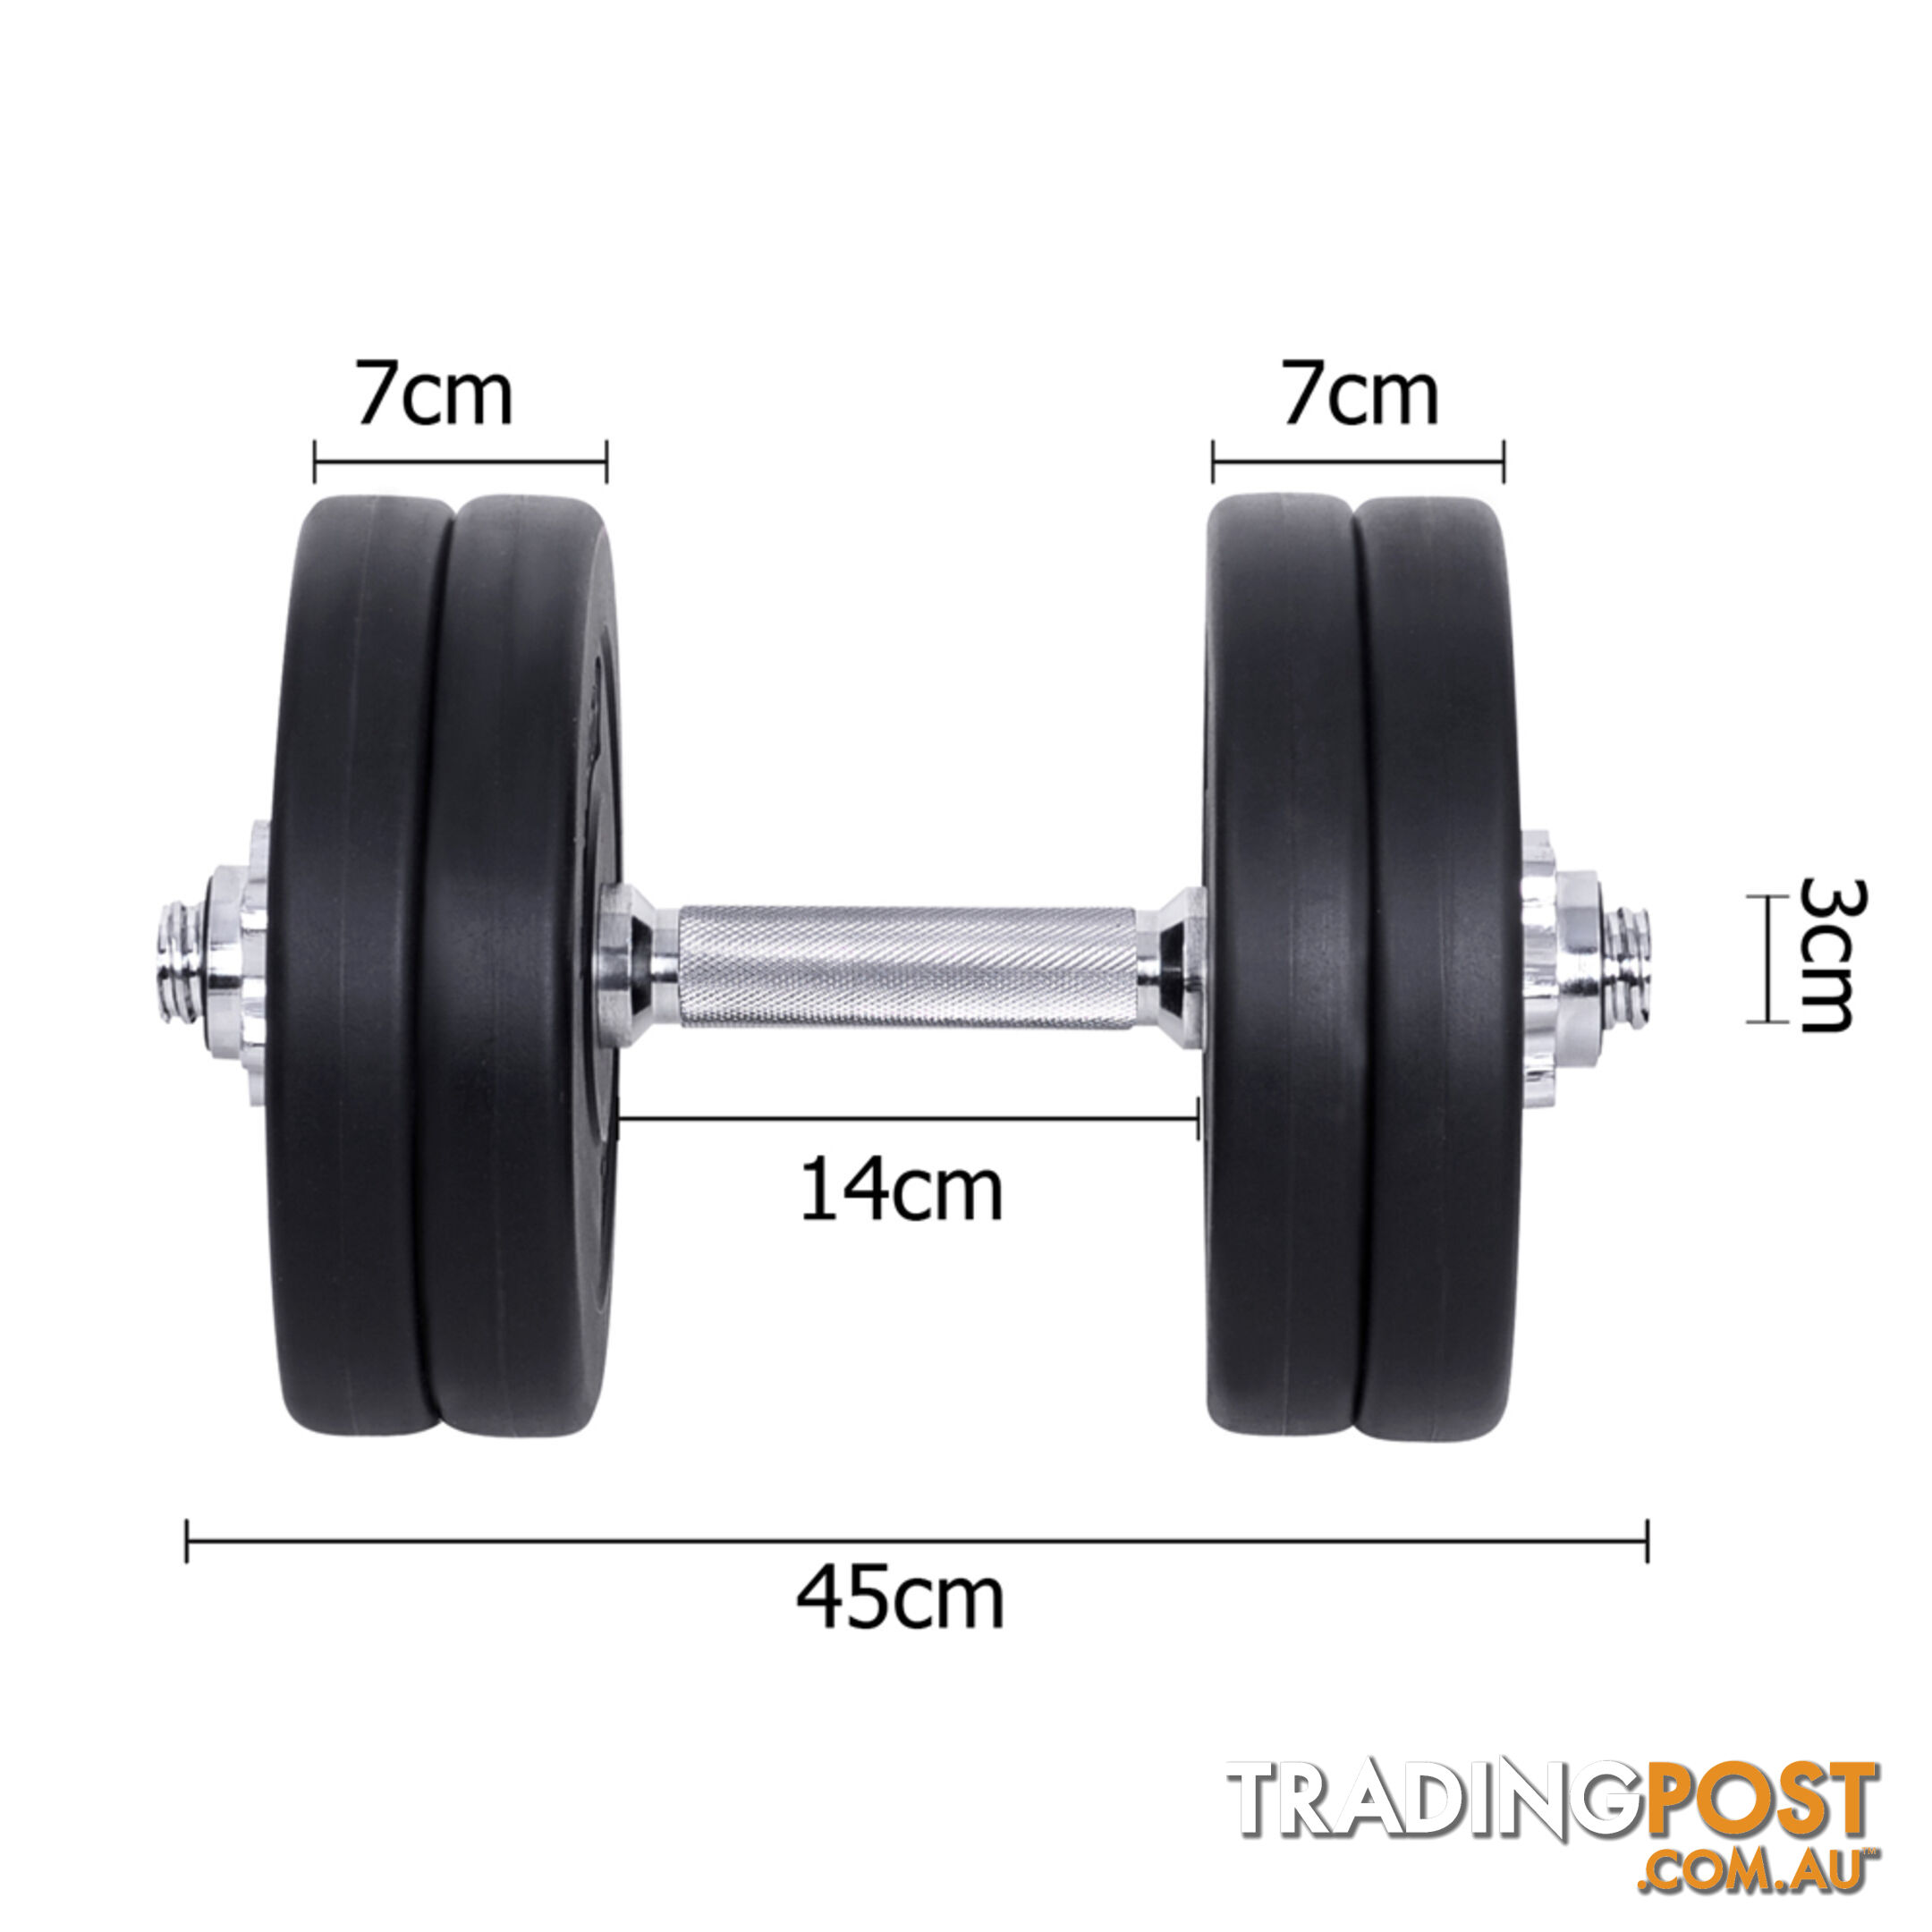 25KG Dumbbell Set Home Gym Fitness Exercise Body Workout Adjustable Weights